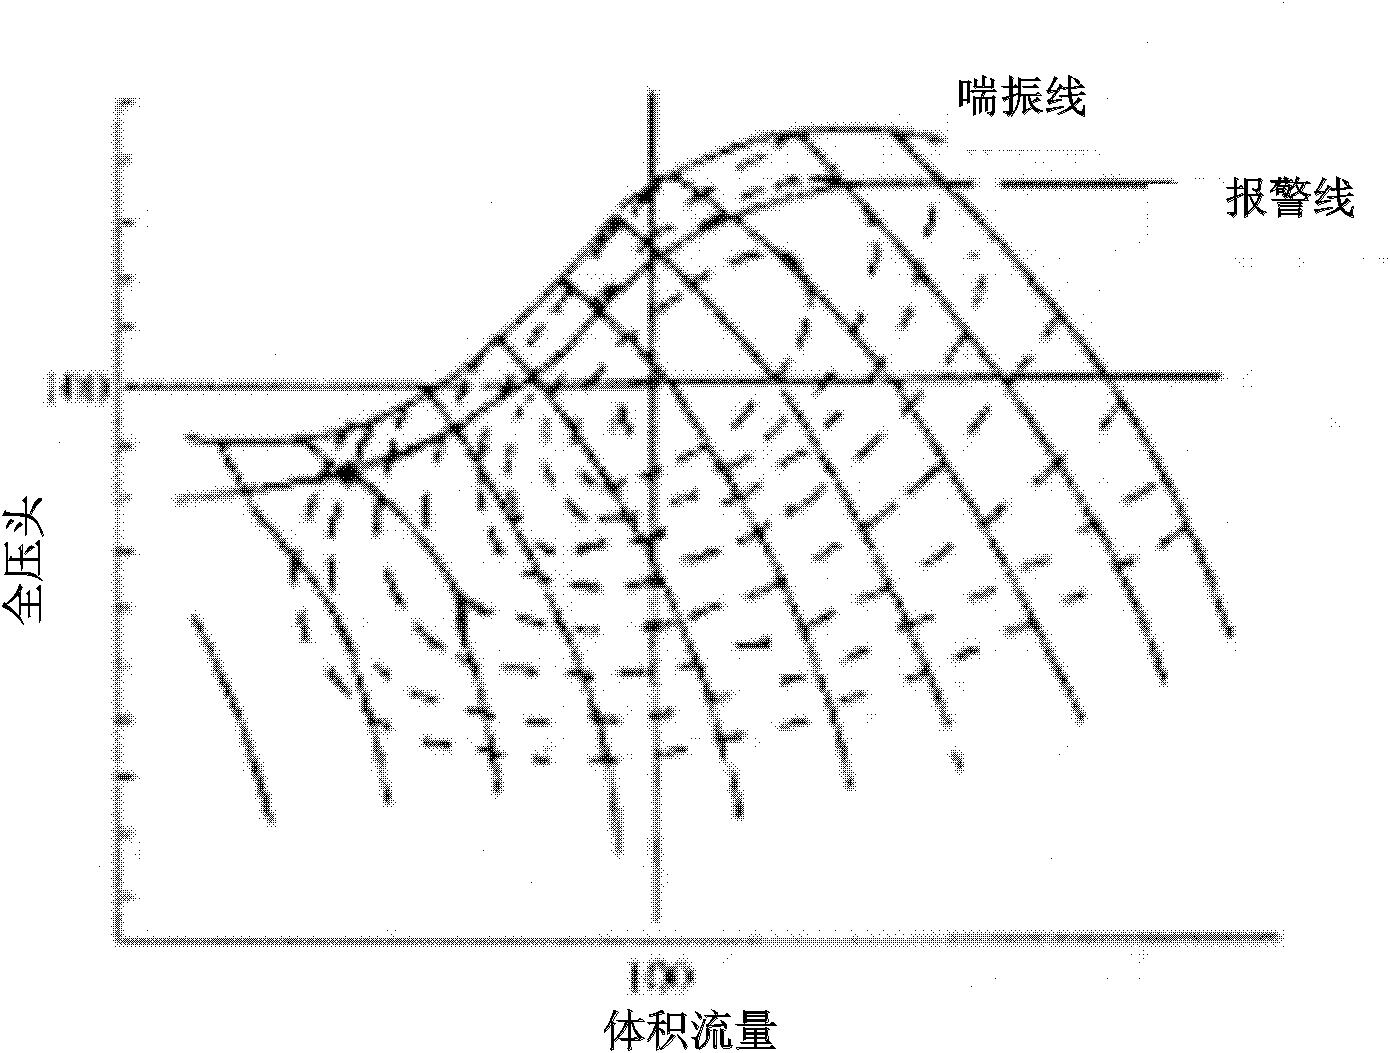 Real-time monitoring and preventing method for surge and stall of axial flow fan